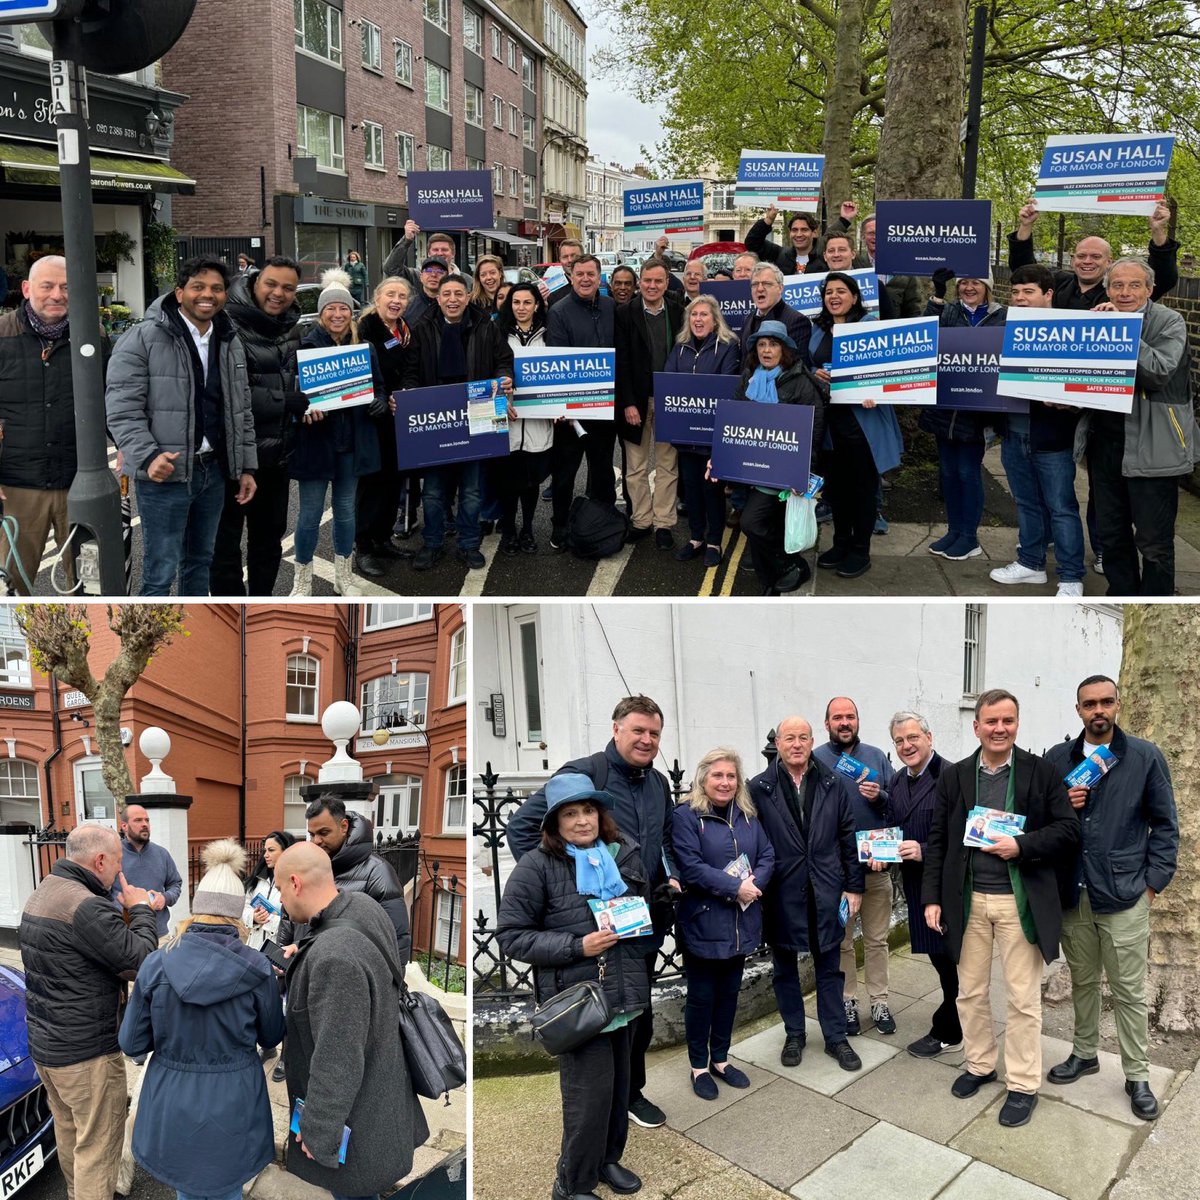 Huge gang out in #WestKensington this morning with @GregHands @MelJStride @Mohamed_Y_Ali for the fabulous @Councillorsuzie & @Tony_Devenish on the doorsteps! Less than a week to go! Remember a vote for anyone other than Susan Hall will just help Sadiq win another four years…